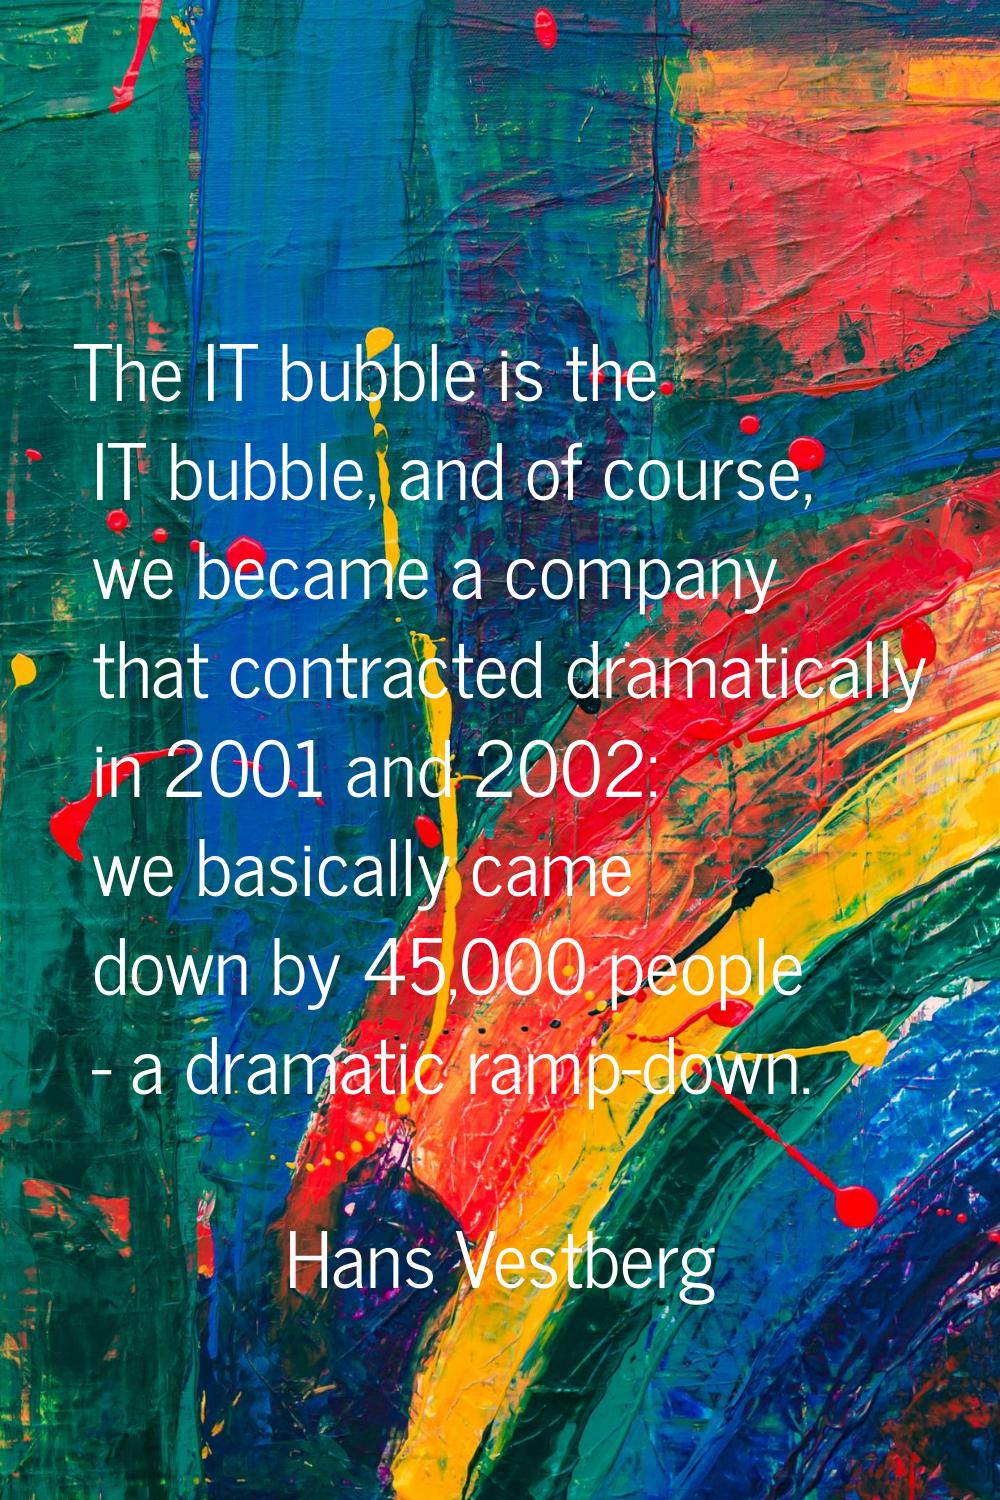 The IT bubble is the IT bubble, and of course, we became a company that contracted dramatically in 